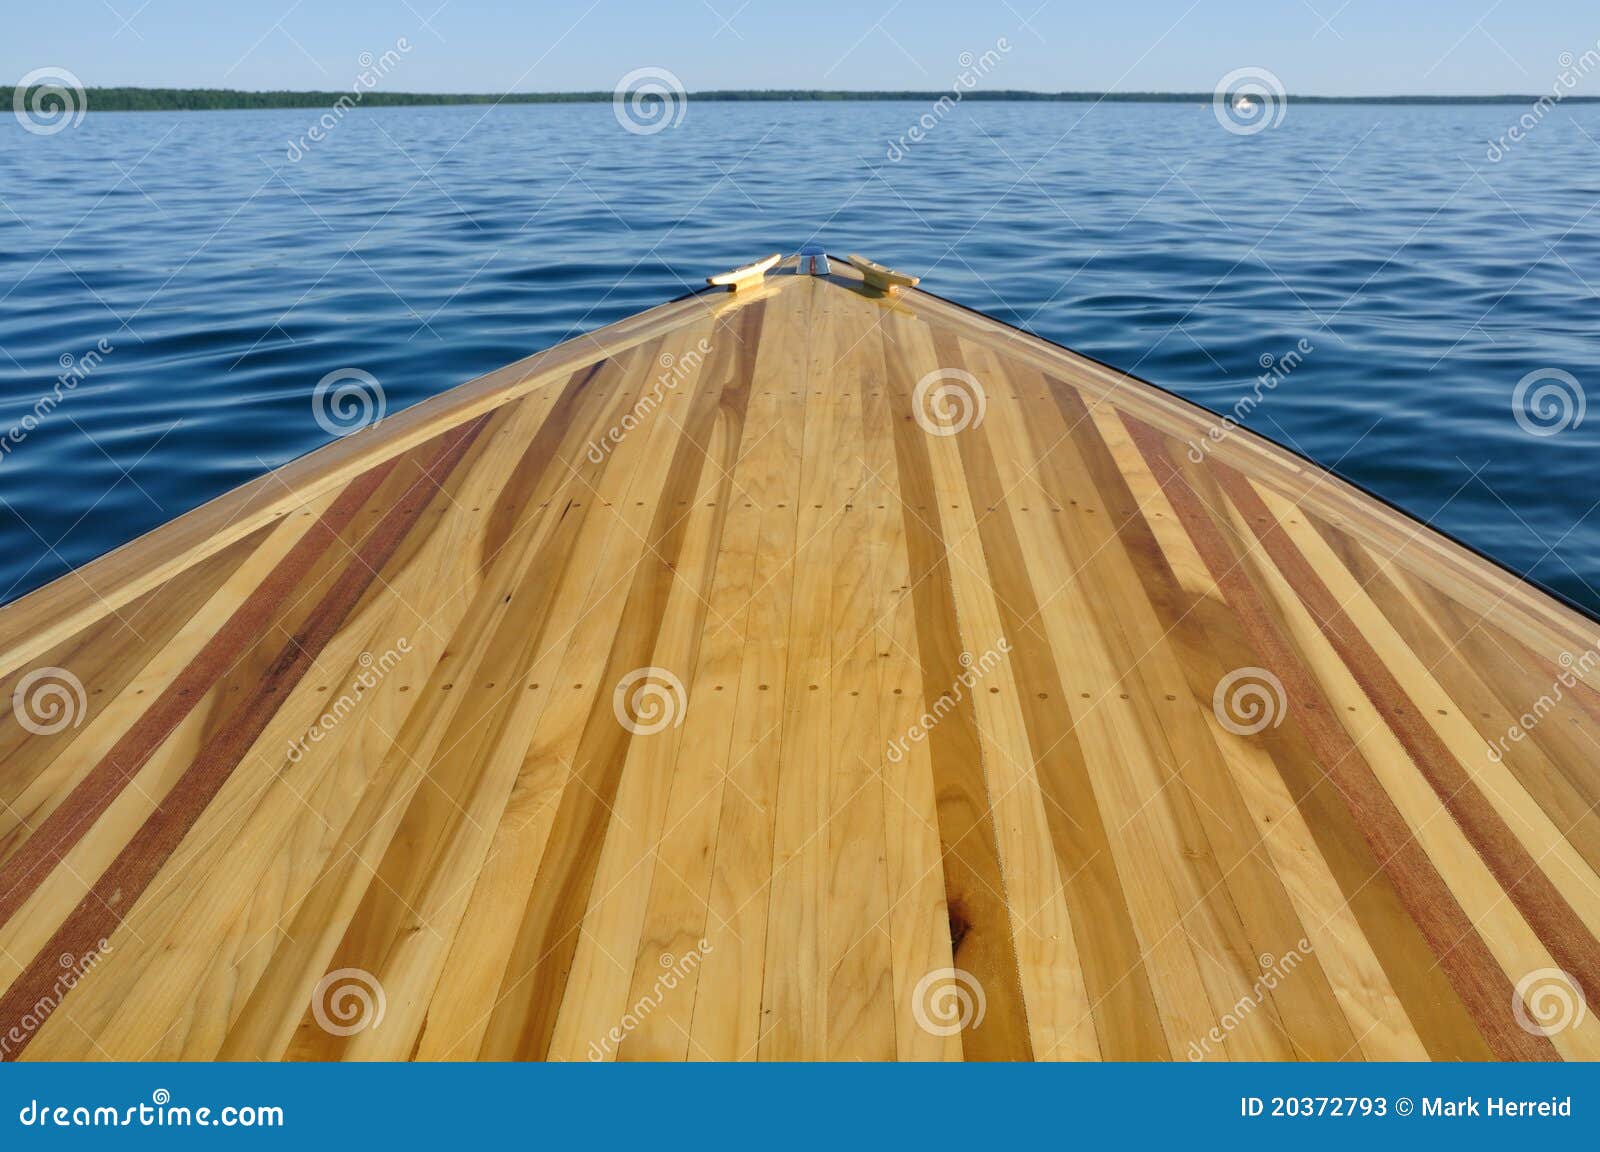 Wood Strip Bow Deck Of Wooden Boat Stock Image - Image 